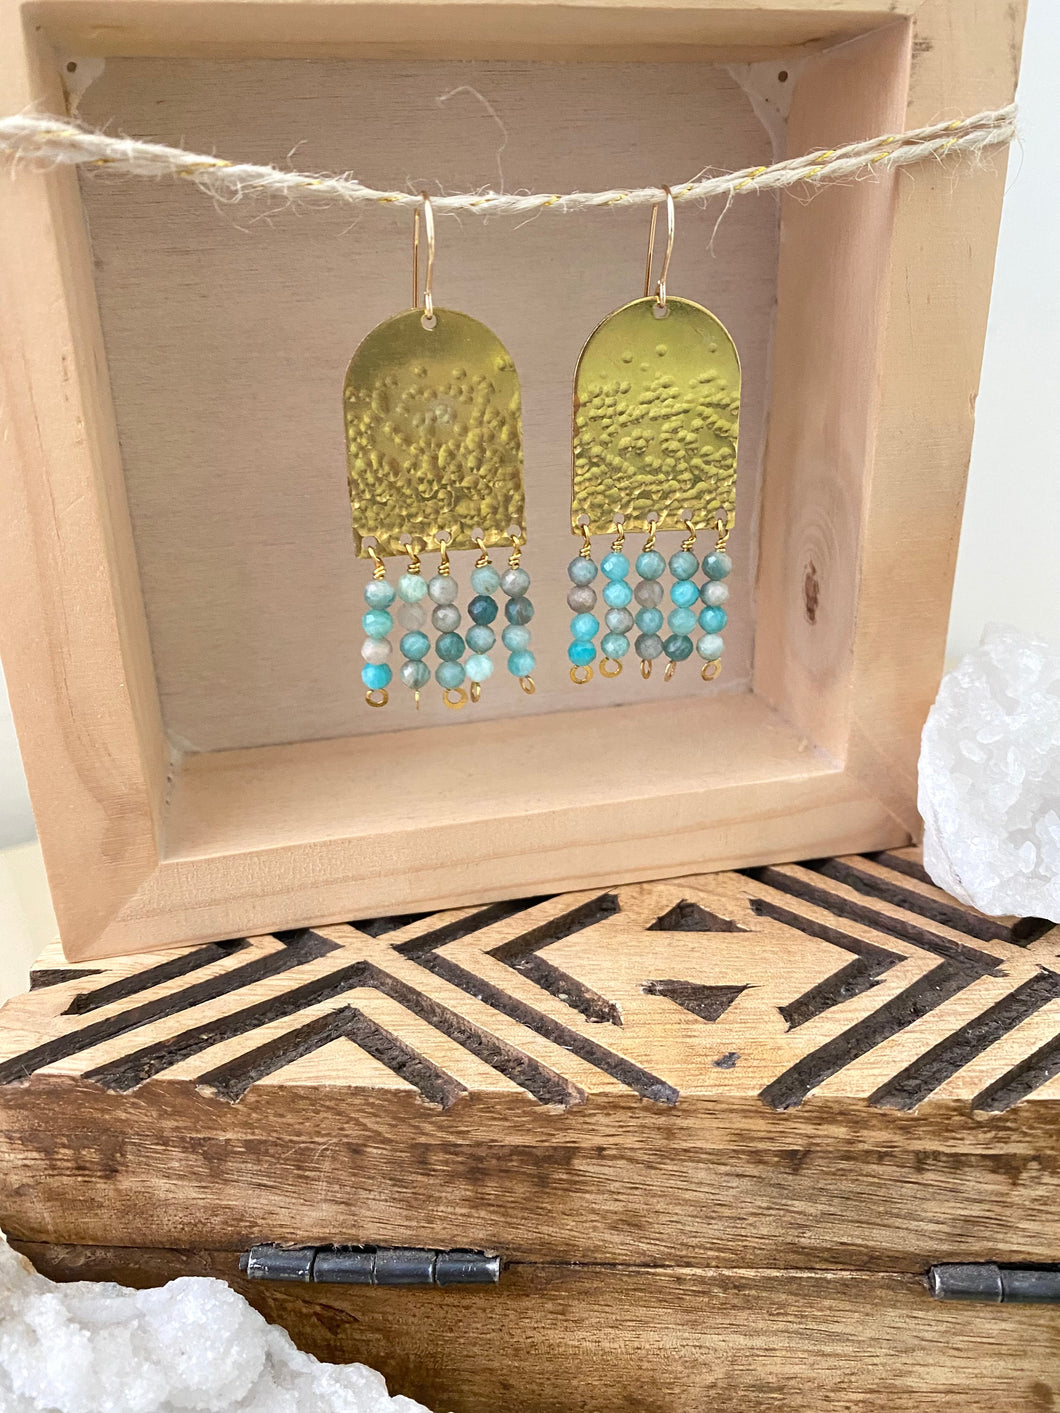 Limited Edition Fringe Earrings with Blue Stones - 14k Gold filled Ear Wires